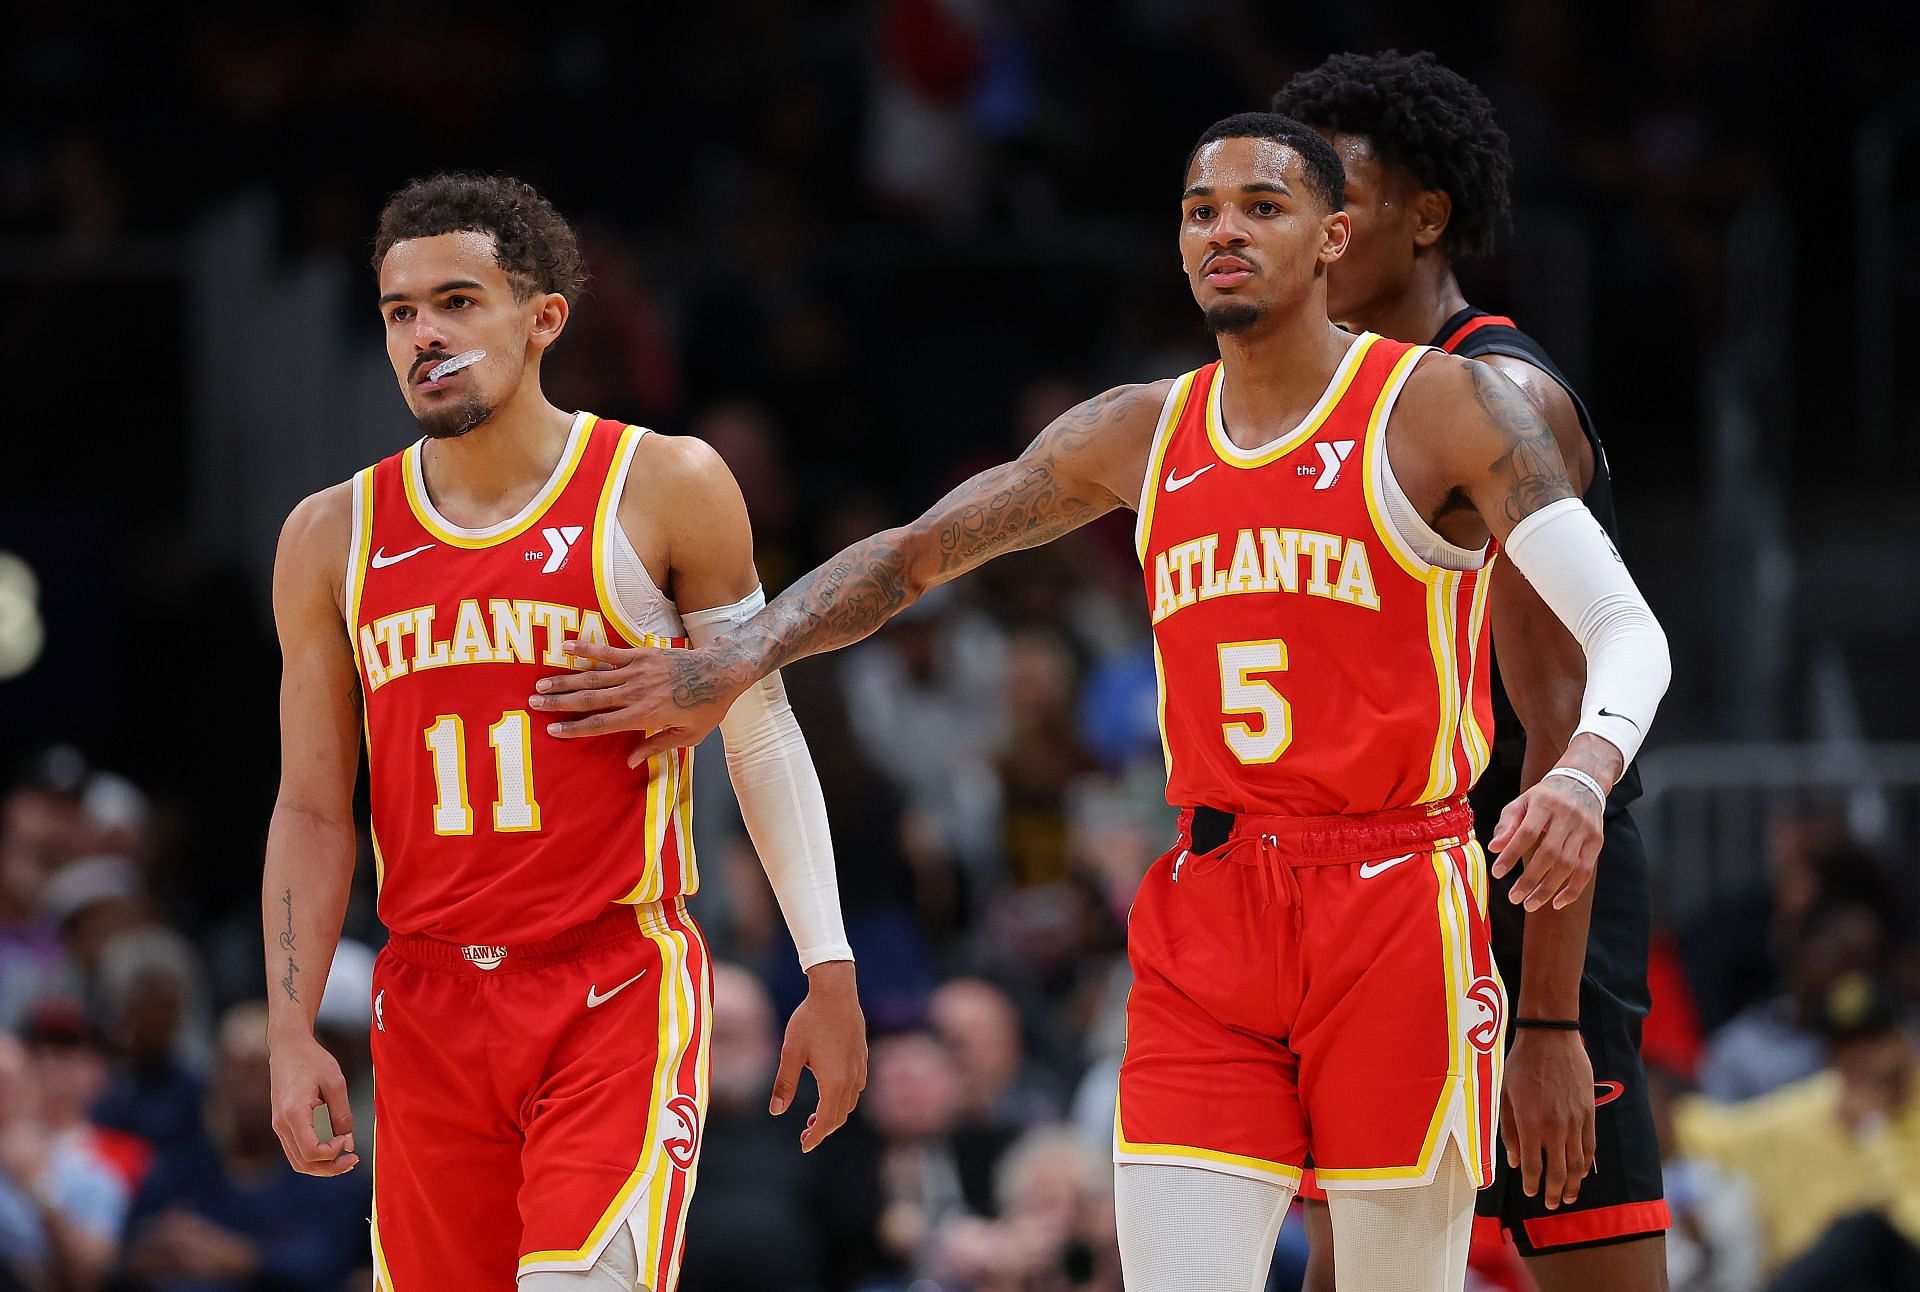 Trae Young and Dejounte Murray might welcome Ryan Dunn as a Hawks teammate.